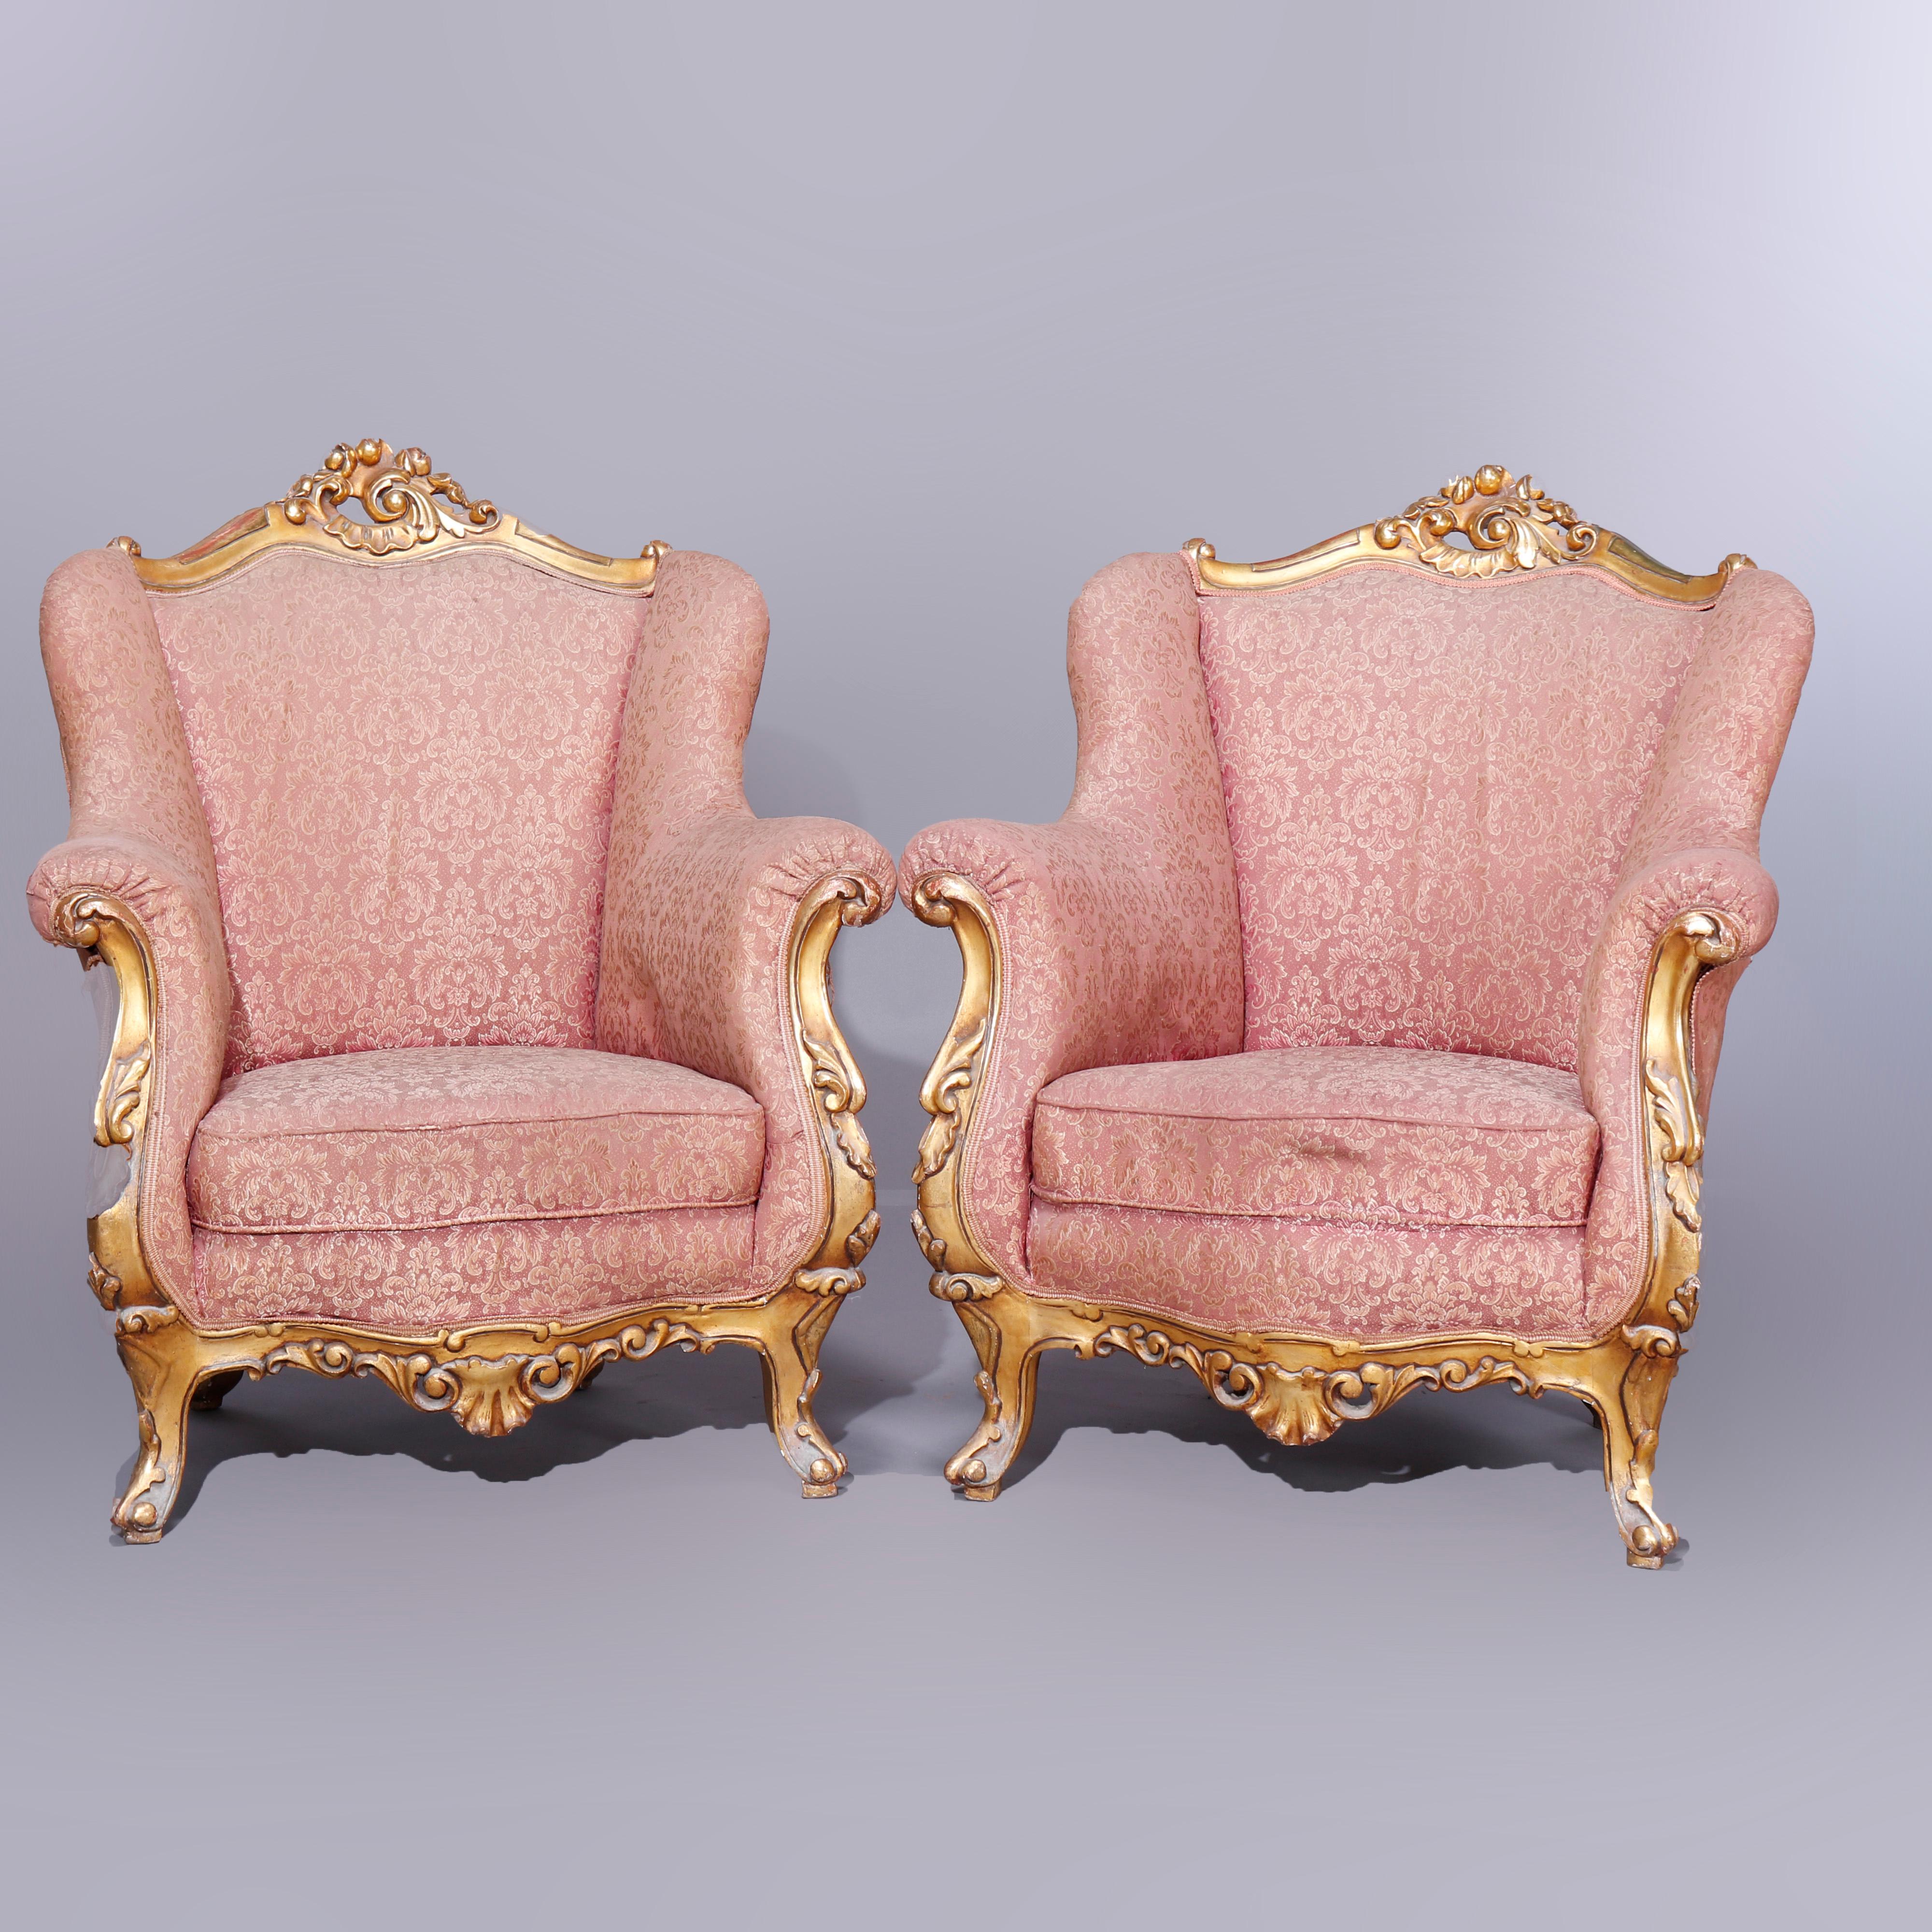 A pair of antique French Louis XIV style wing back bergere armchairs offer pierced and foliate carved gilt crest over upholstered wing back fireside chairs having scroll form arms and foliate carved giltwood apron, raised on giltwood cabriole legs,